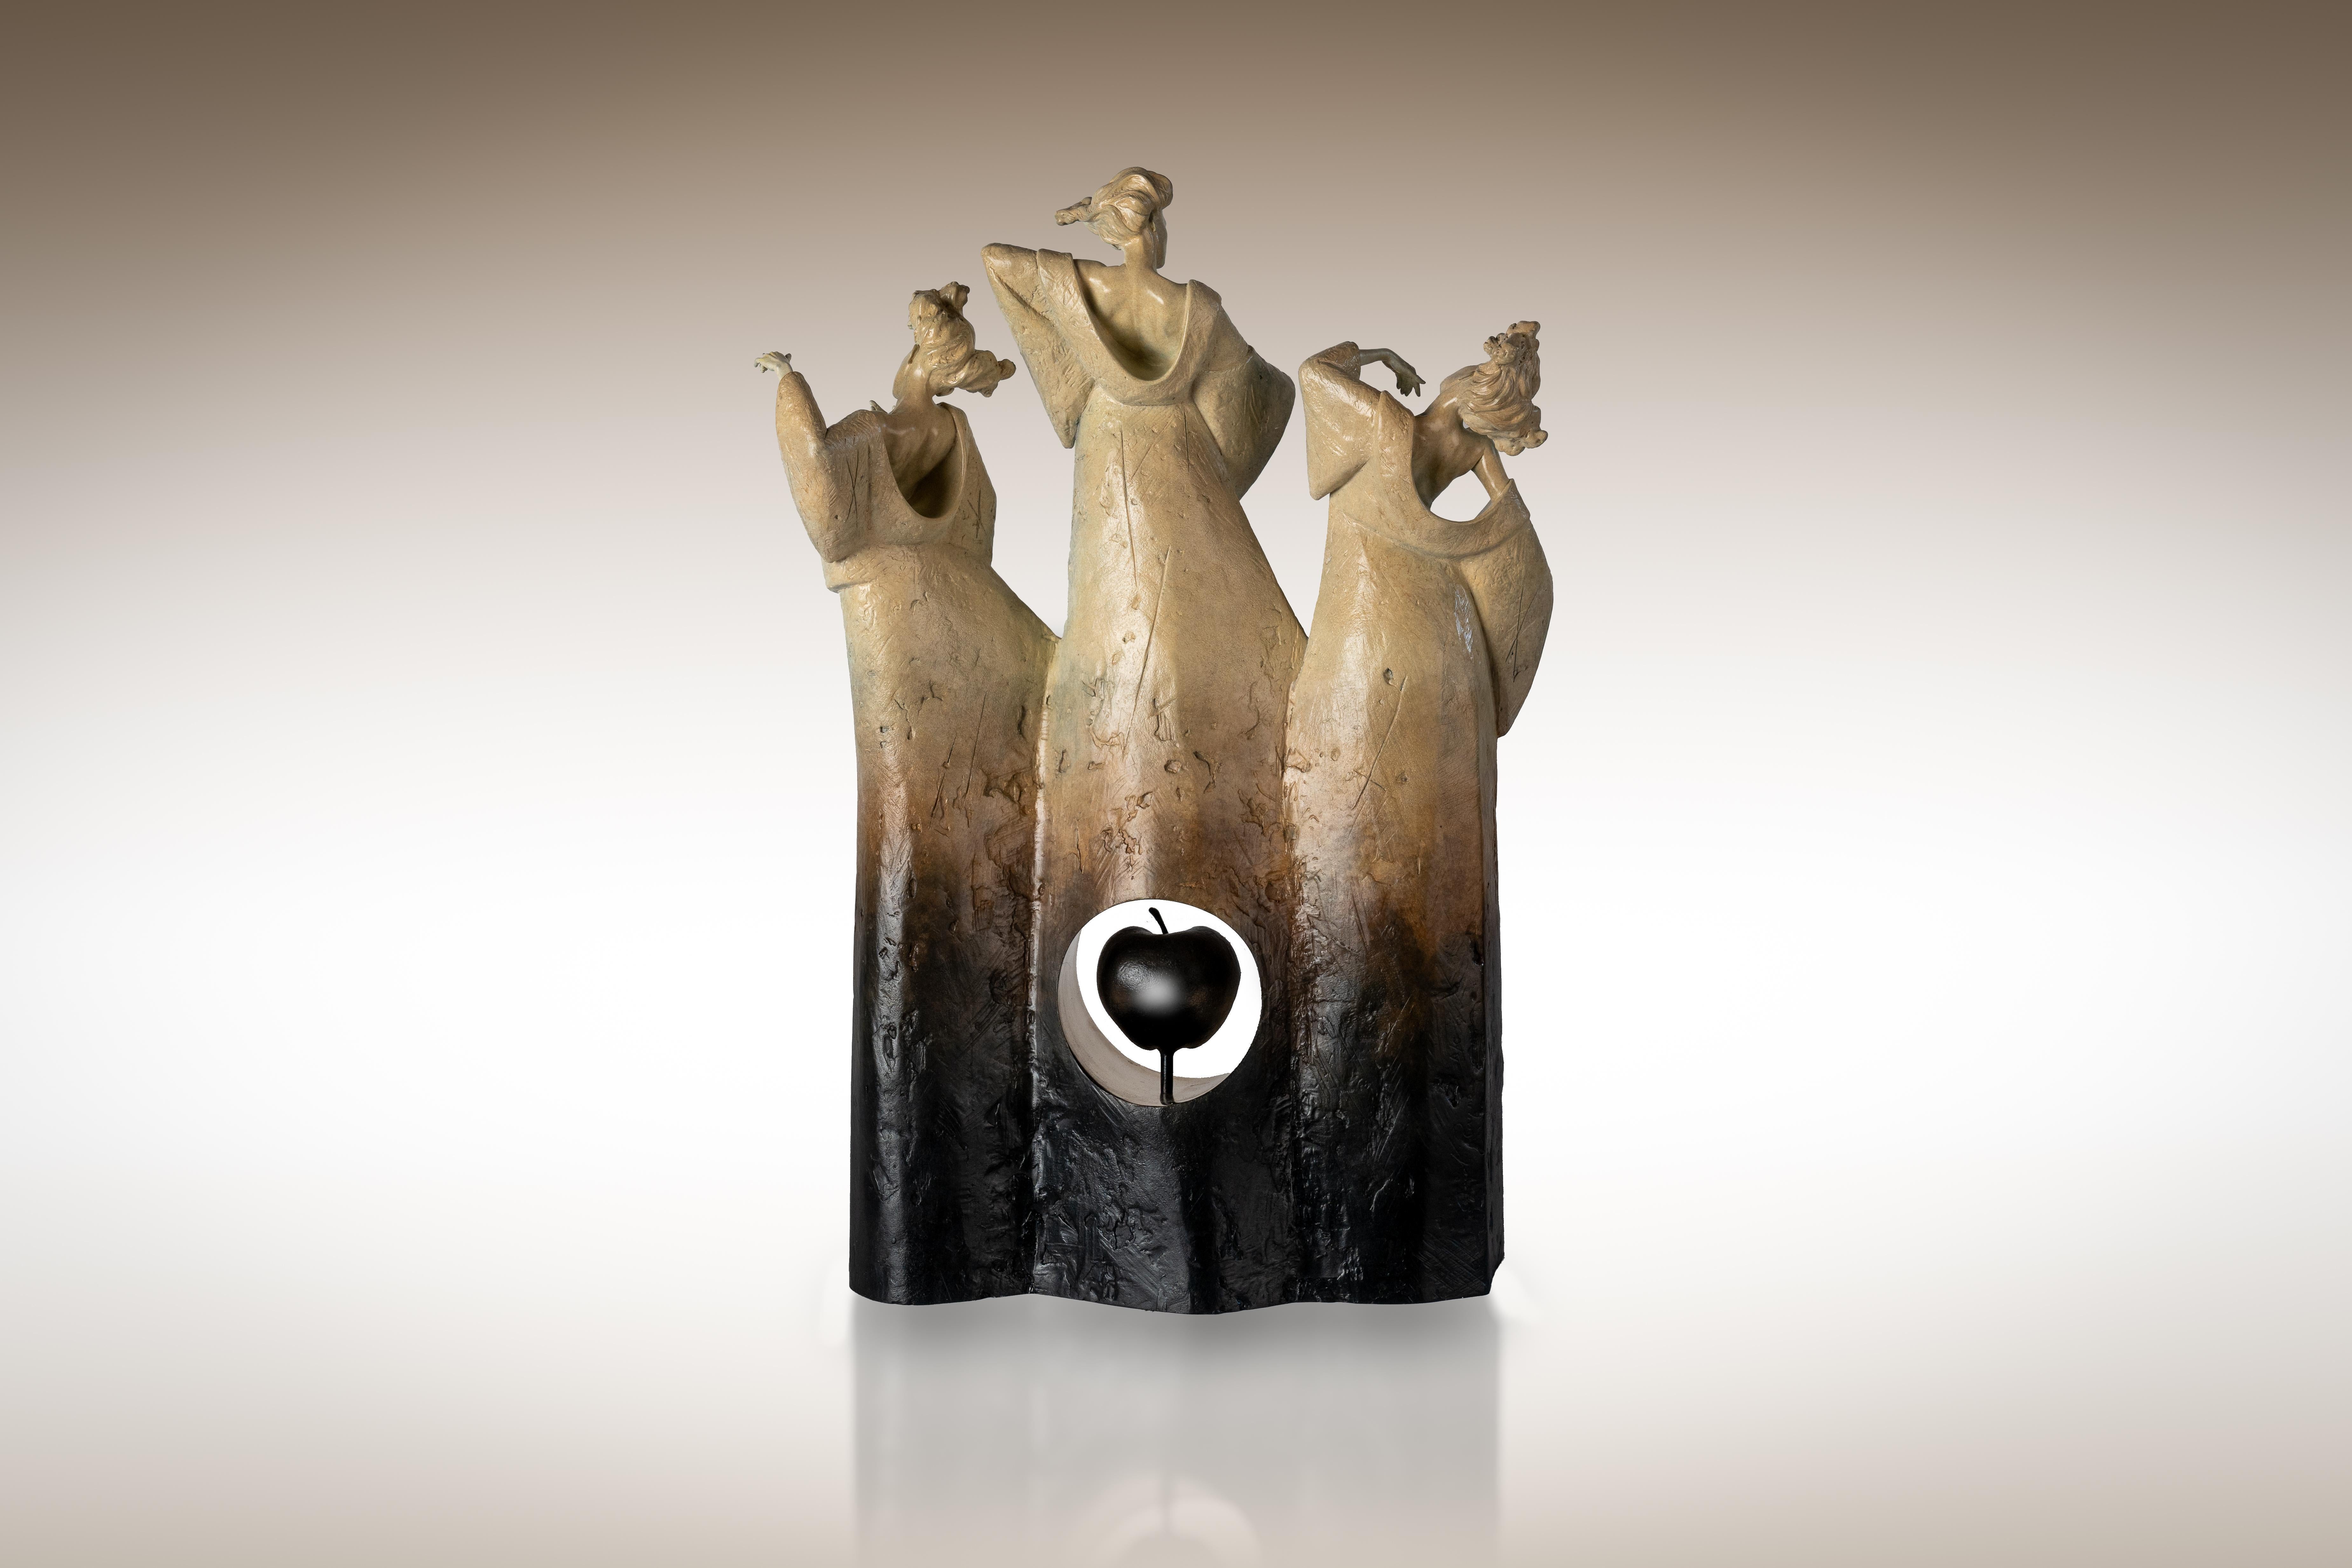 Contemporary Bronze sculpture Ancient Greek Myth 'The Three Fates', figurative - Sculpture by Carl Payne